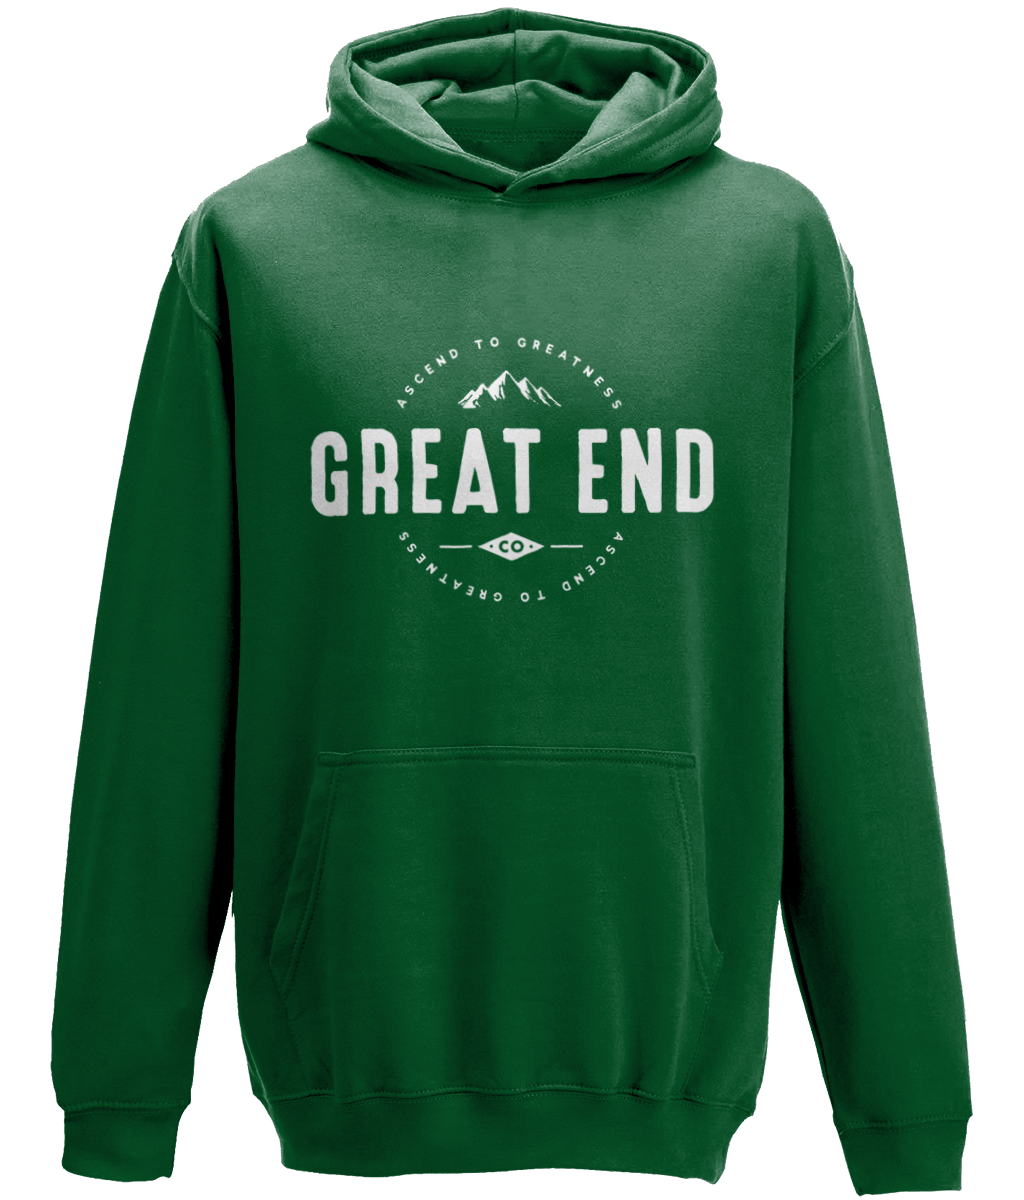 Bottle Green Logo - Bottle Green Hoodie with White Great End Logo - Great End Co